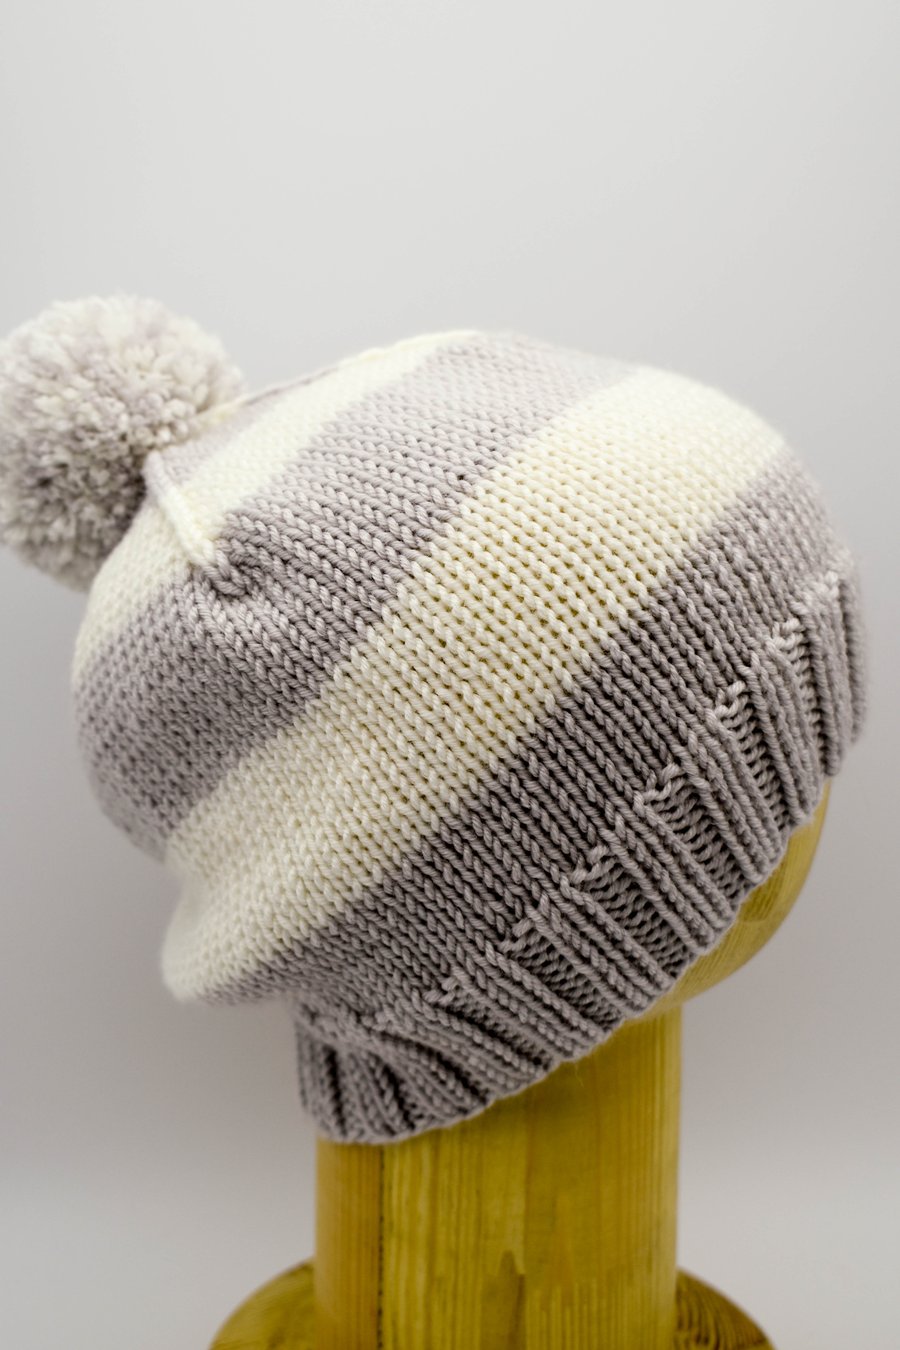 Hand knitted toddler hat in grey and white stripes